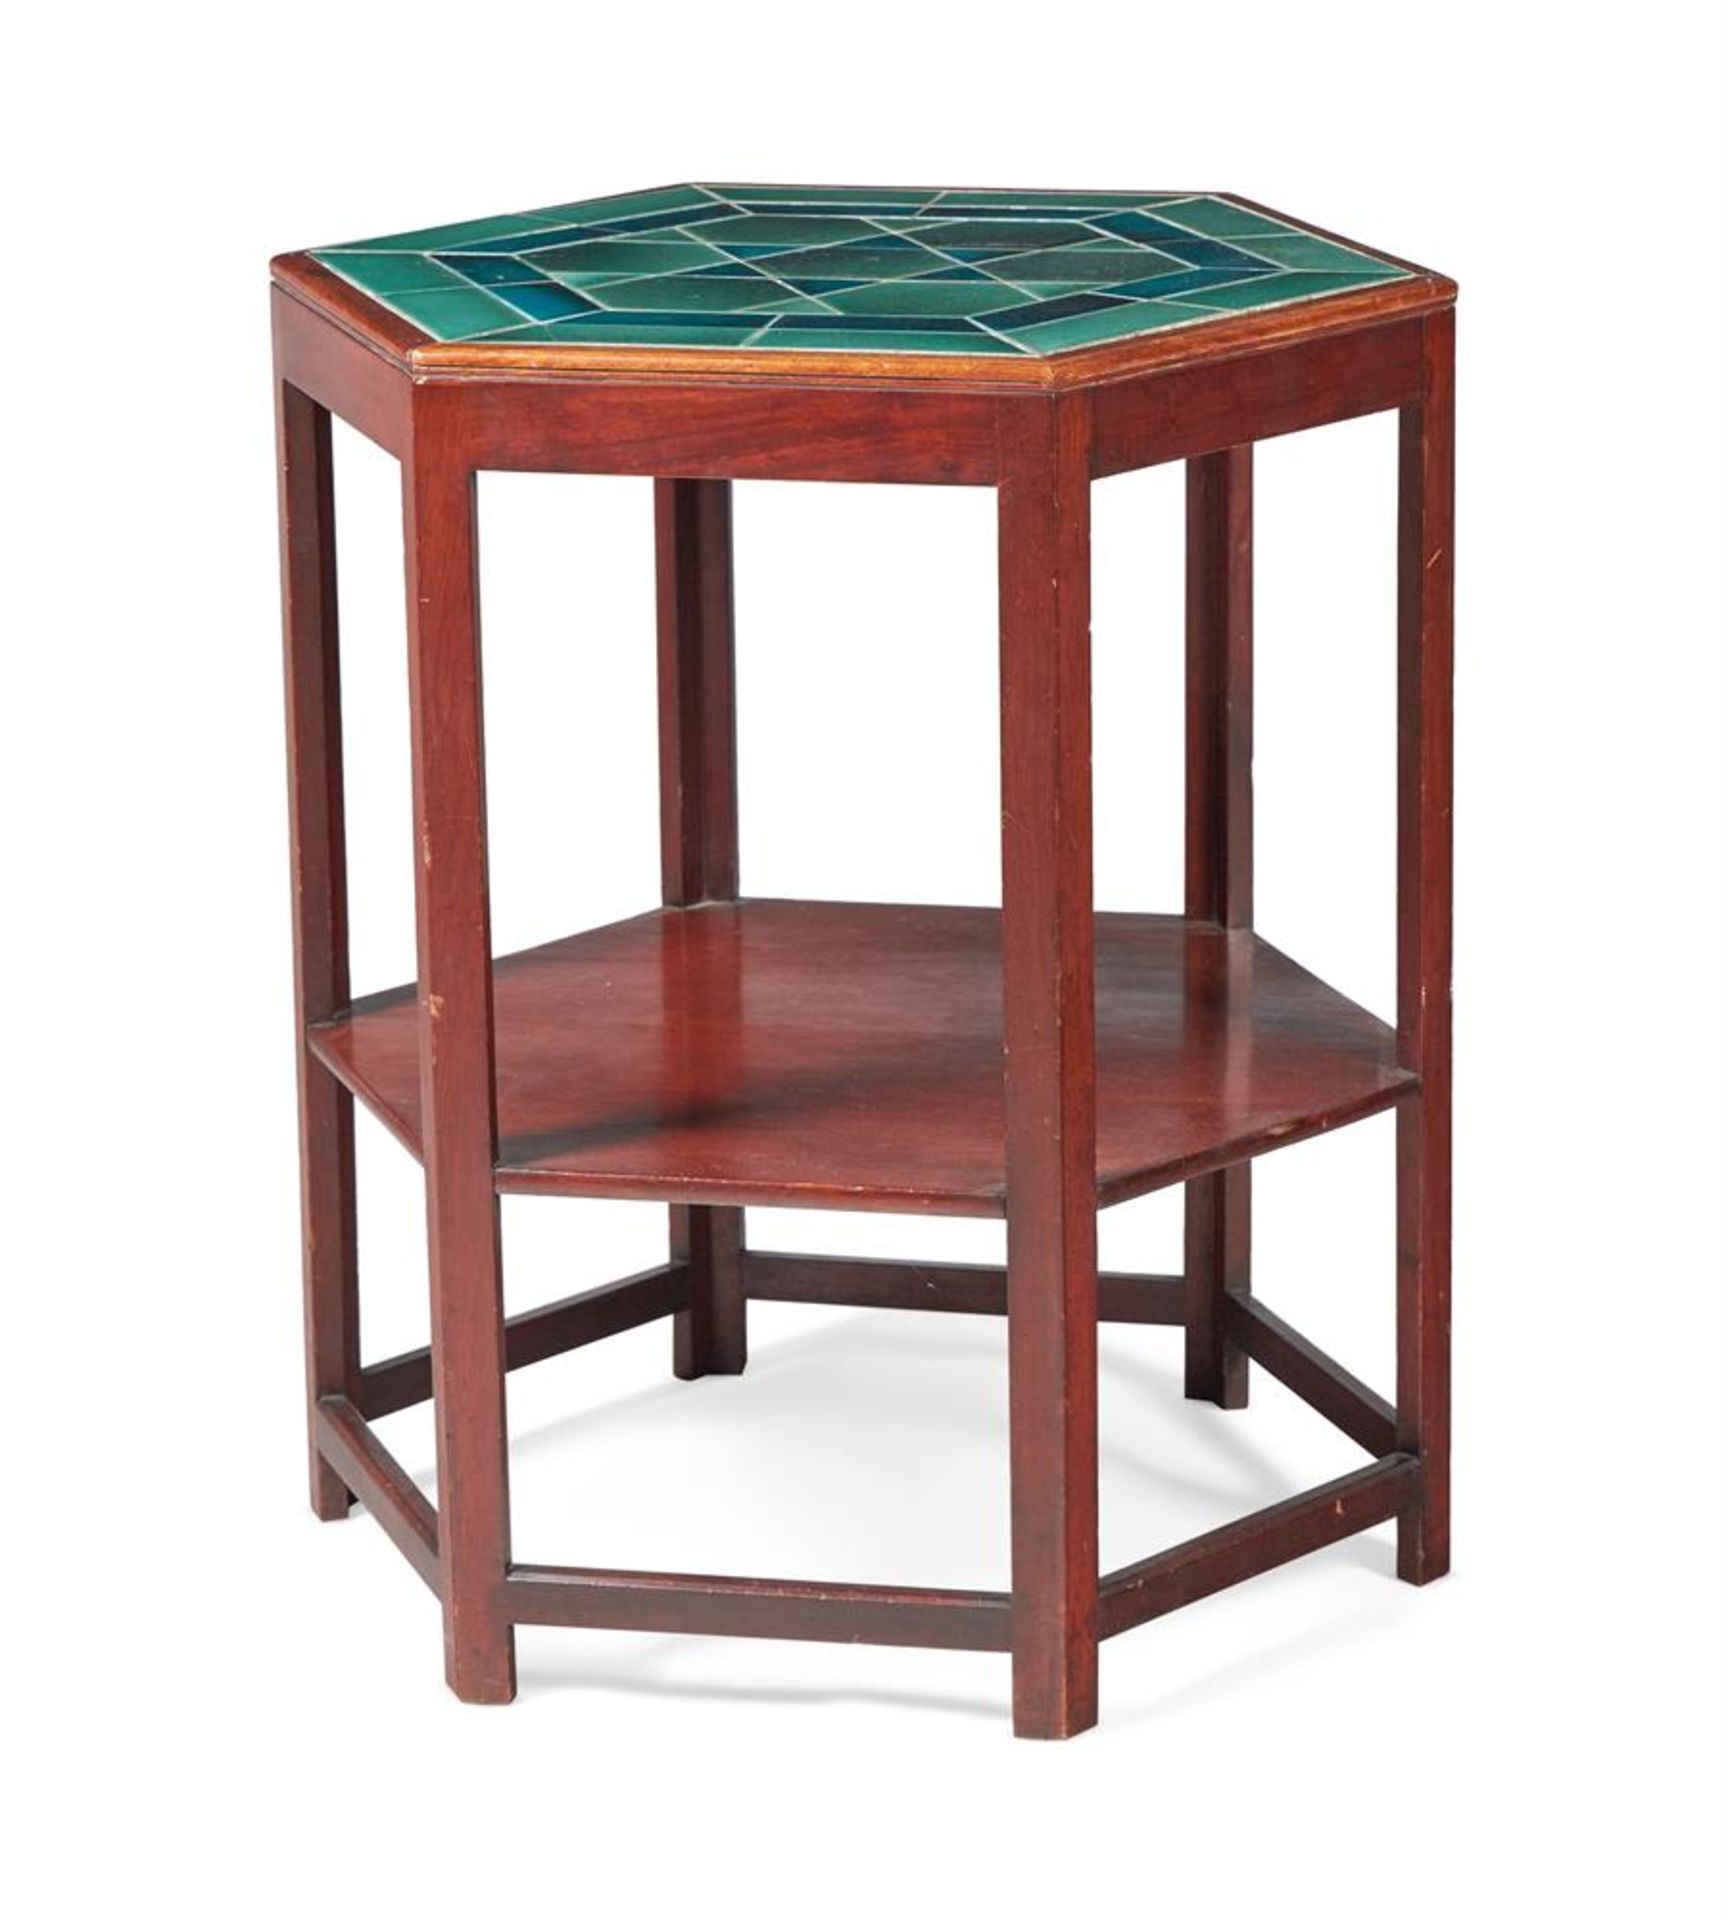 AN ARTS AND CRAFTS MAHOGANY HEXAGONAL TABLE IN THE MANNER OF LIBERTY AND CO., EARLY 20TH CENTURY - Bild 4 aus 4